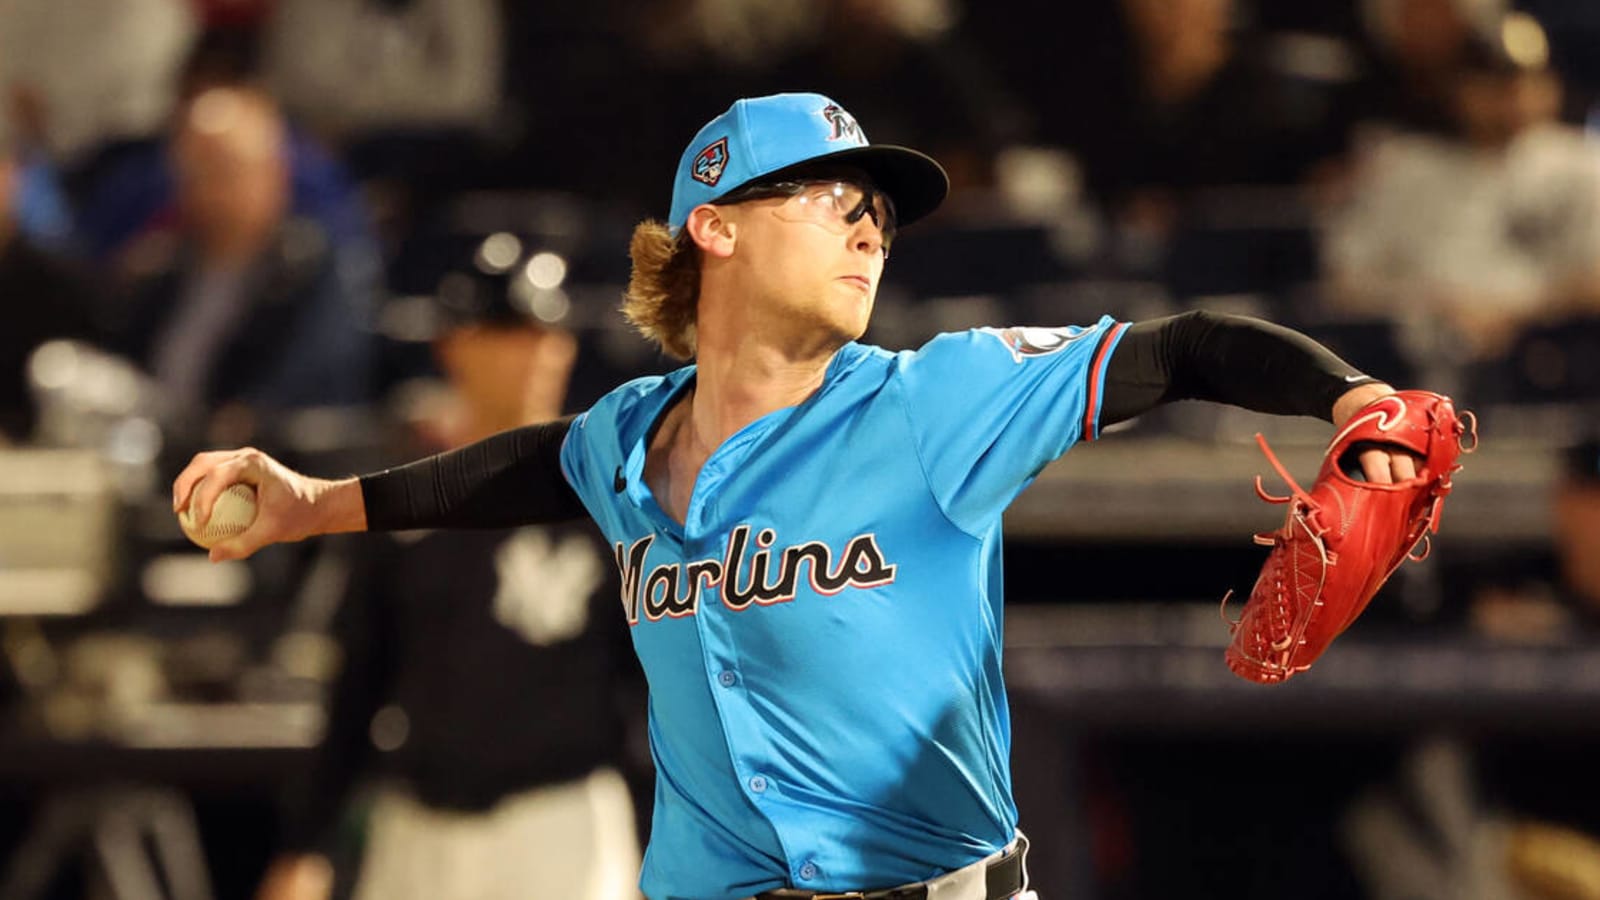 Marlins top prospect has 'inside track' to be fifth starter